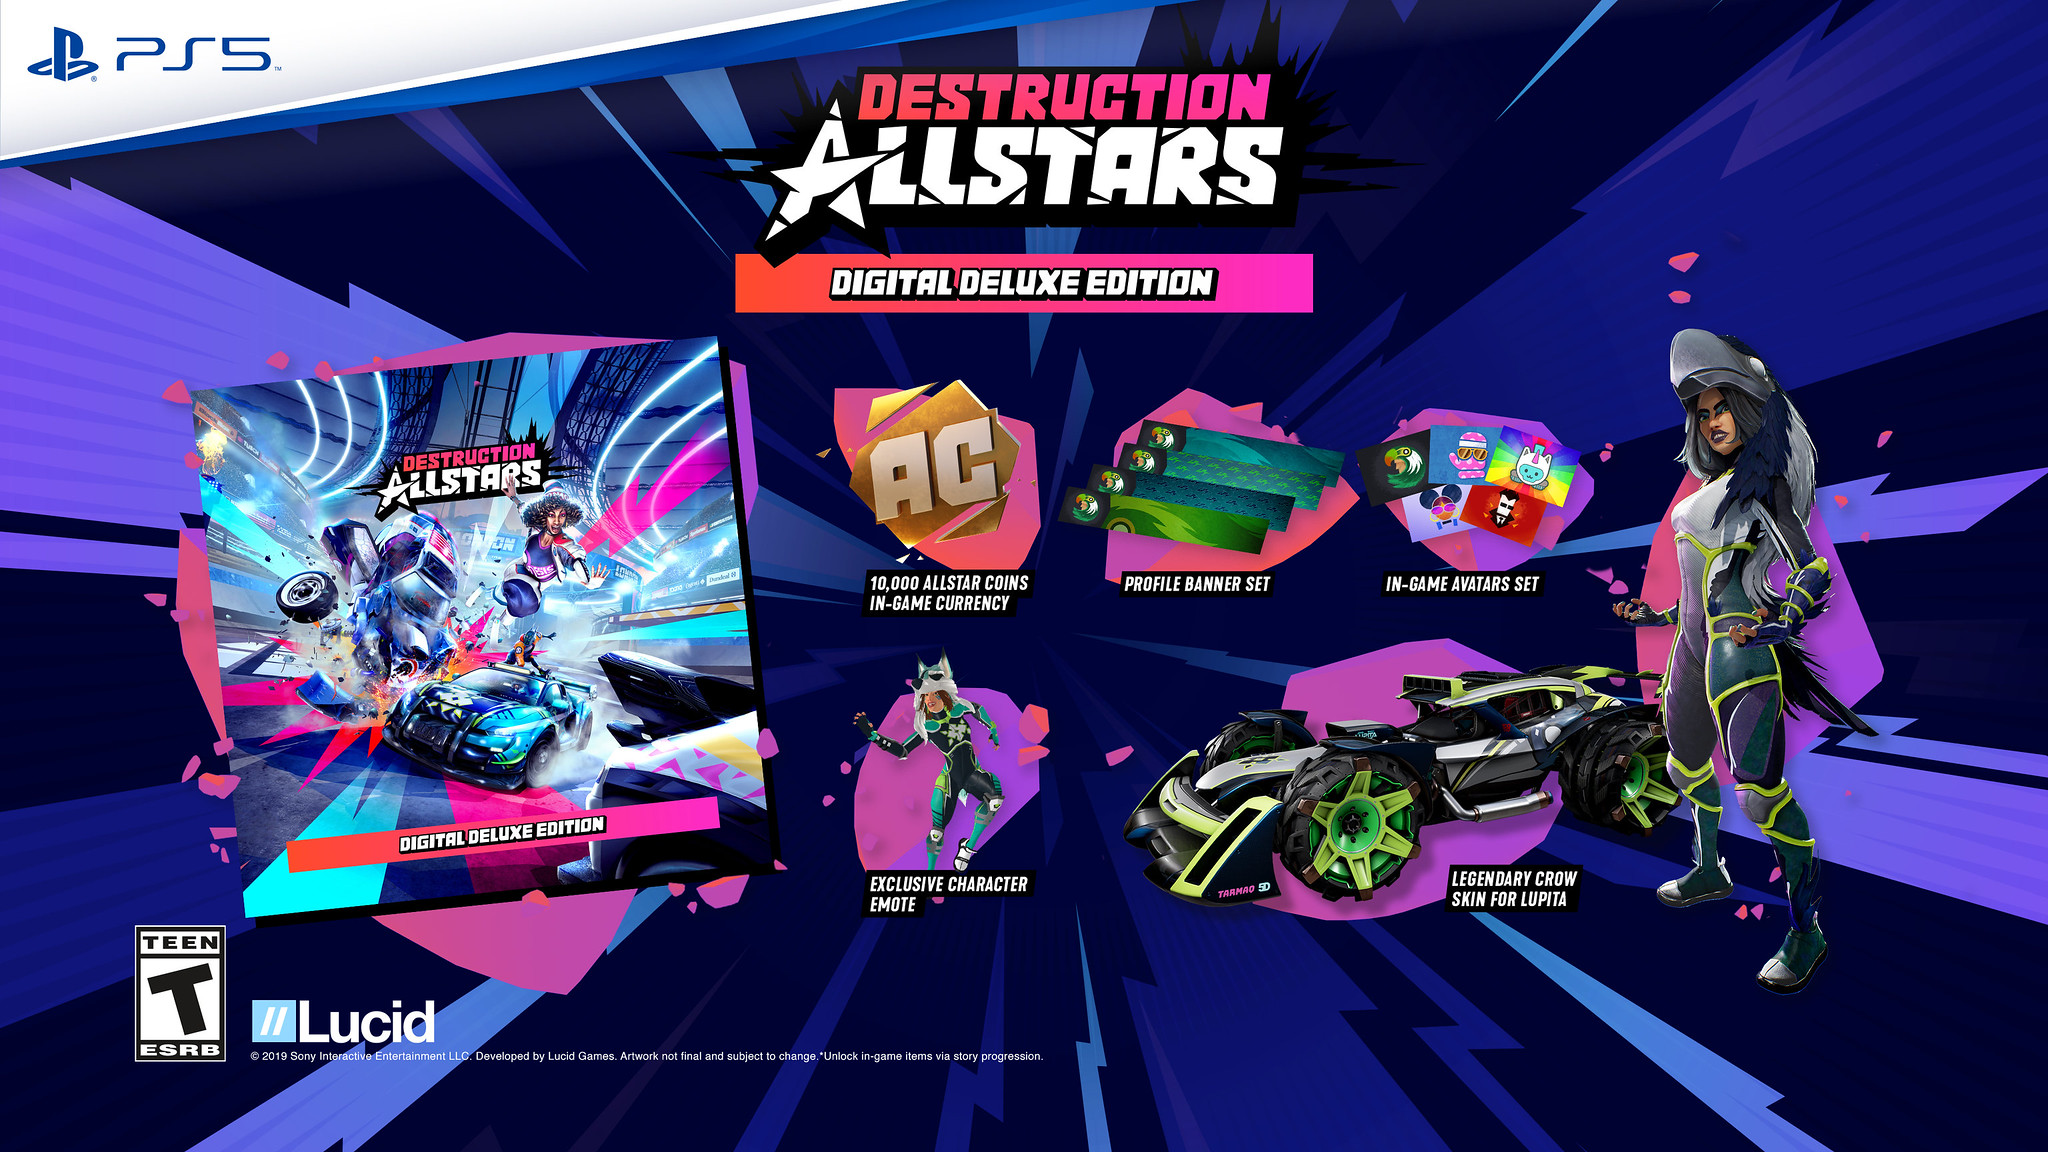 Slam, smash, and boost way PS5 in AllStars, coming fame to to Destruction – your